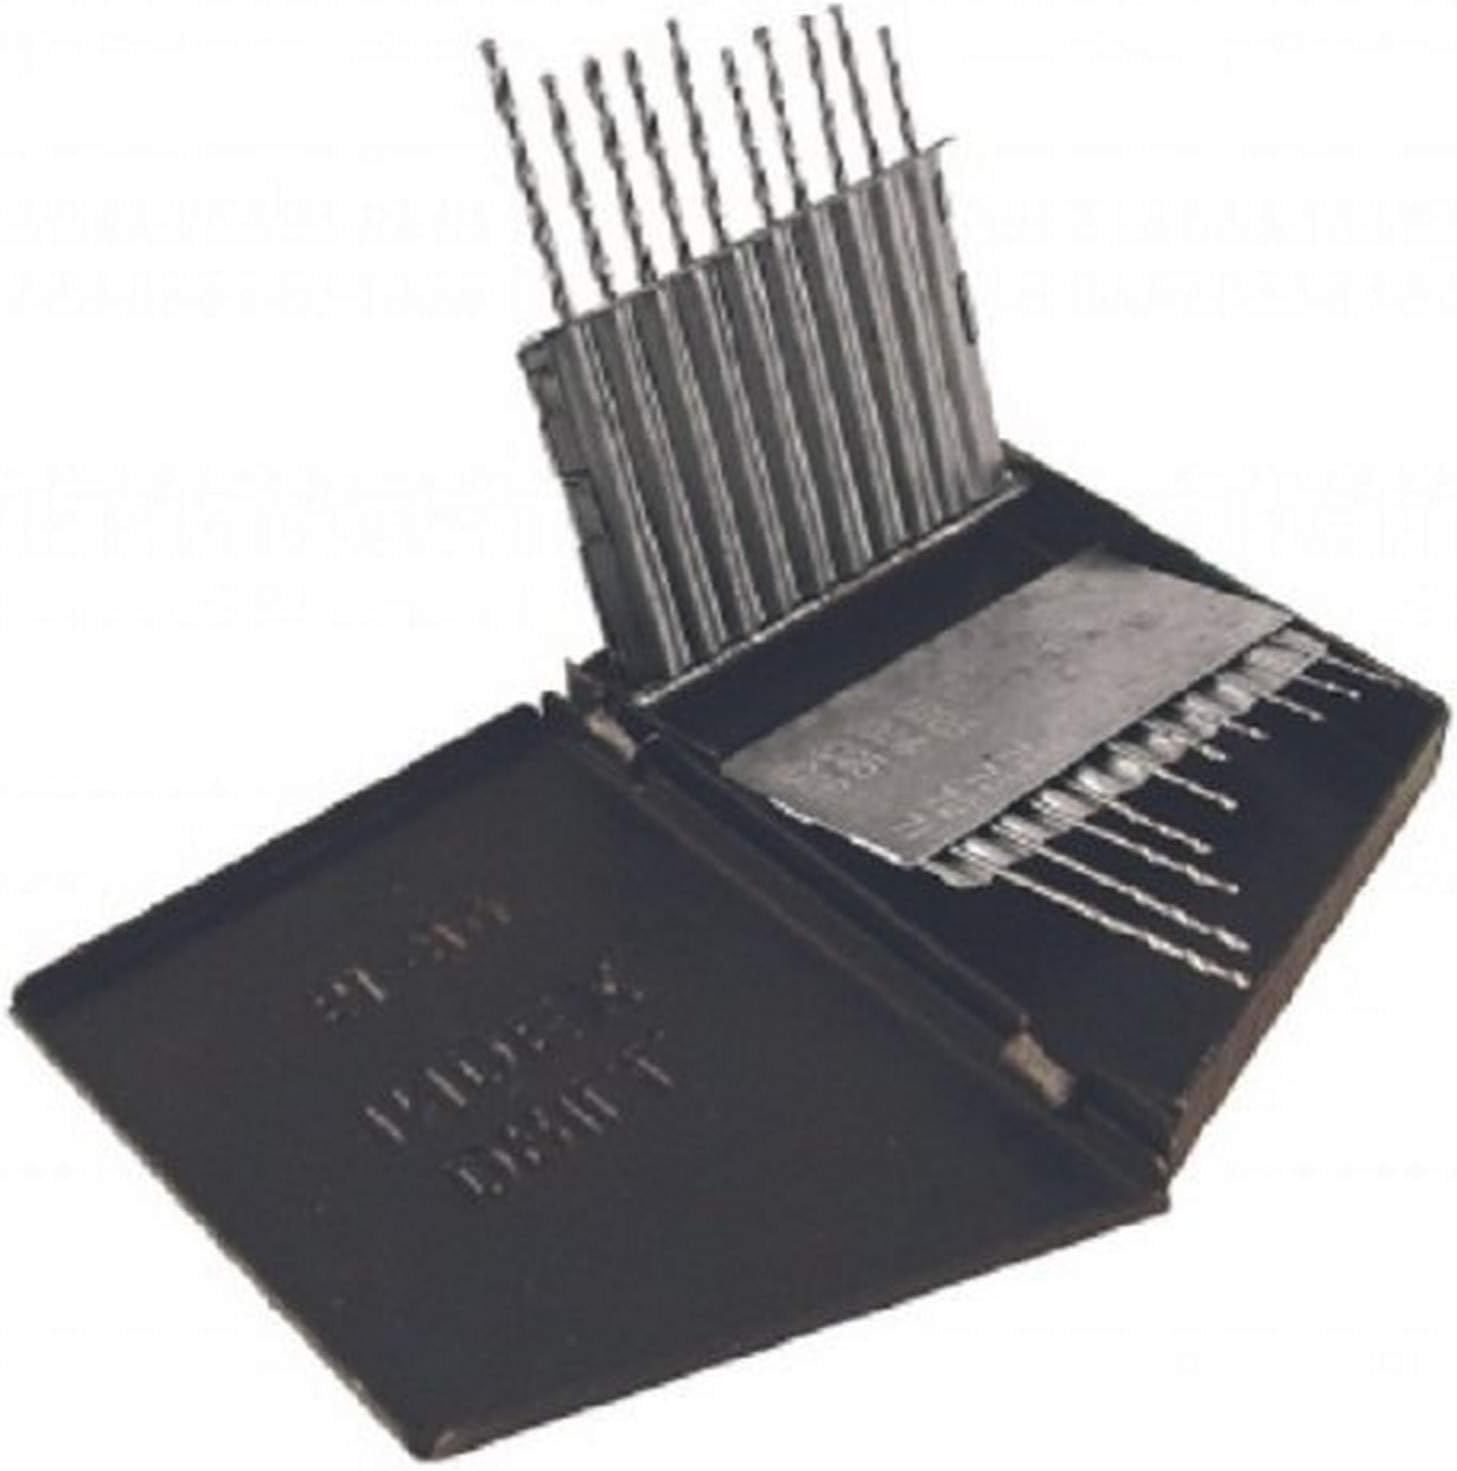 20 PIECE ORIFICE DRILL SET WIRE GUAGES SIZES FOR DRILLING 